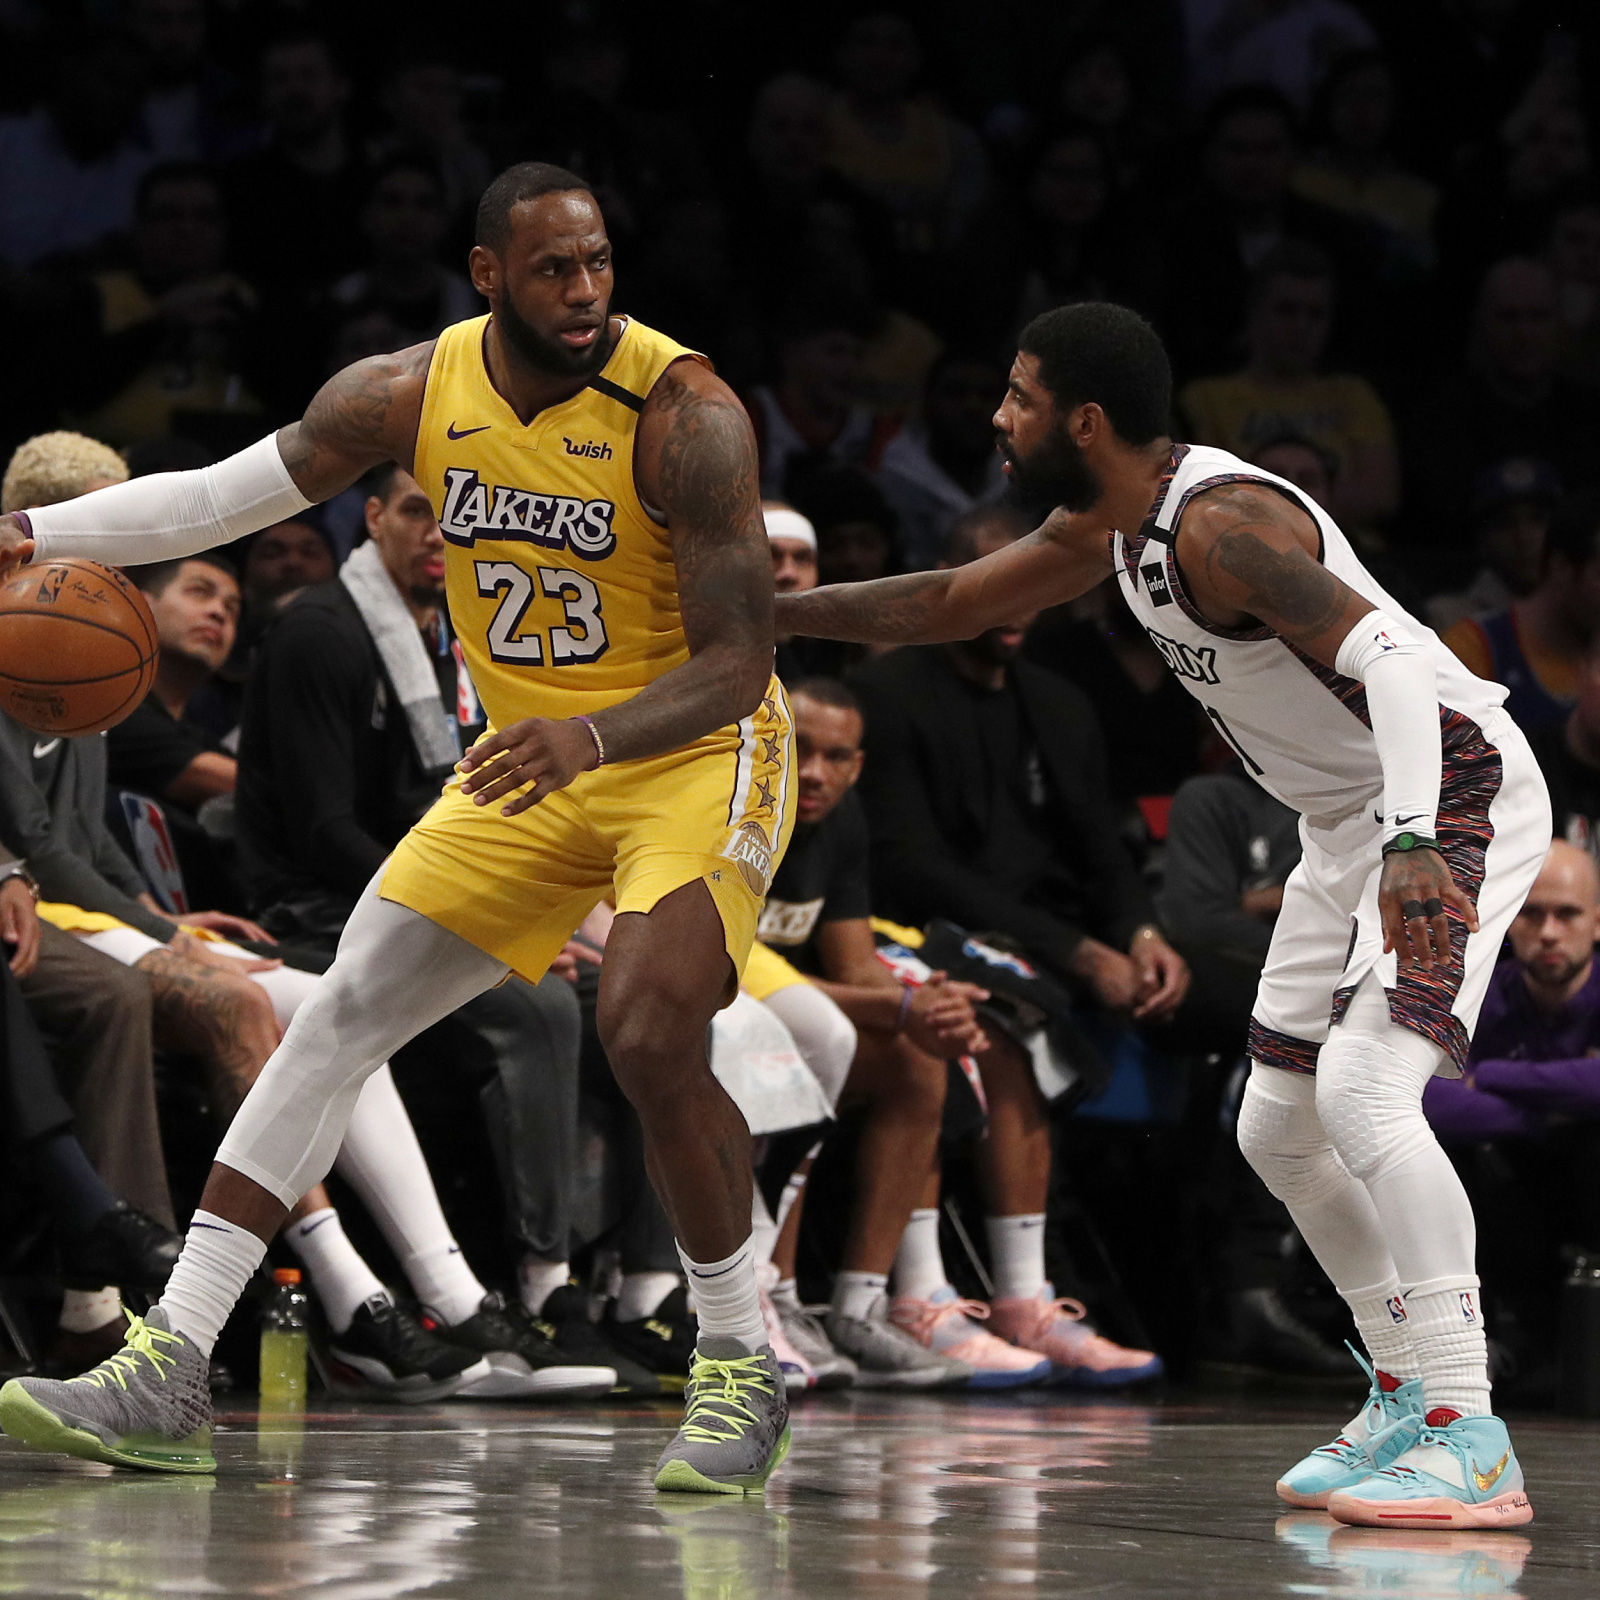 Is the Lakers' front office blaming Klutch Sports, LeBron James